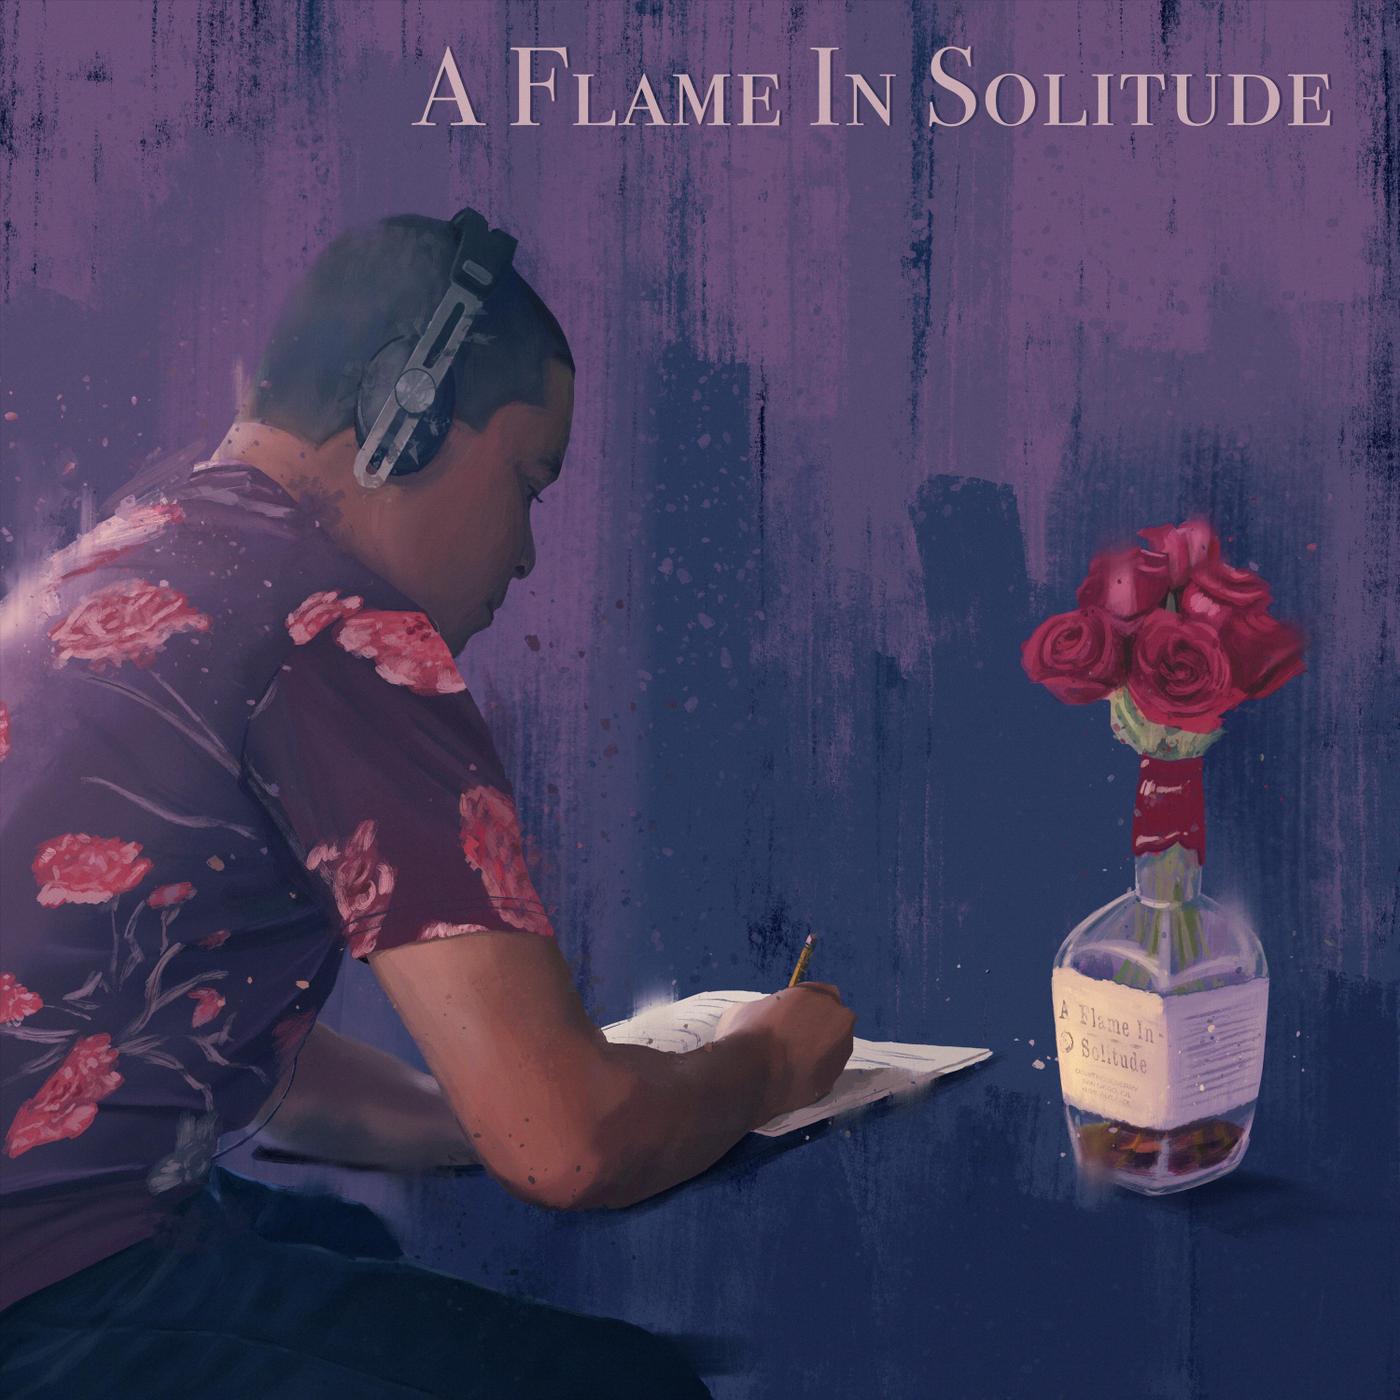 A Flame in Solitude